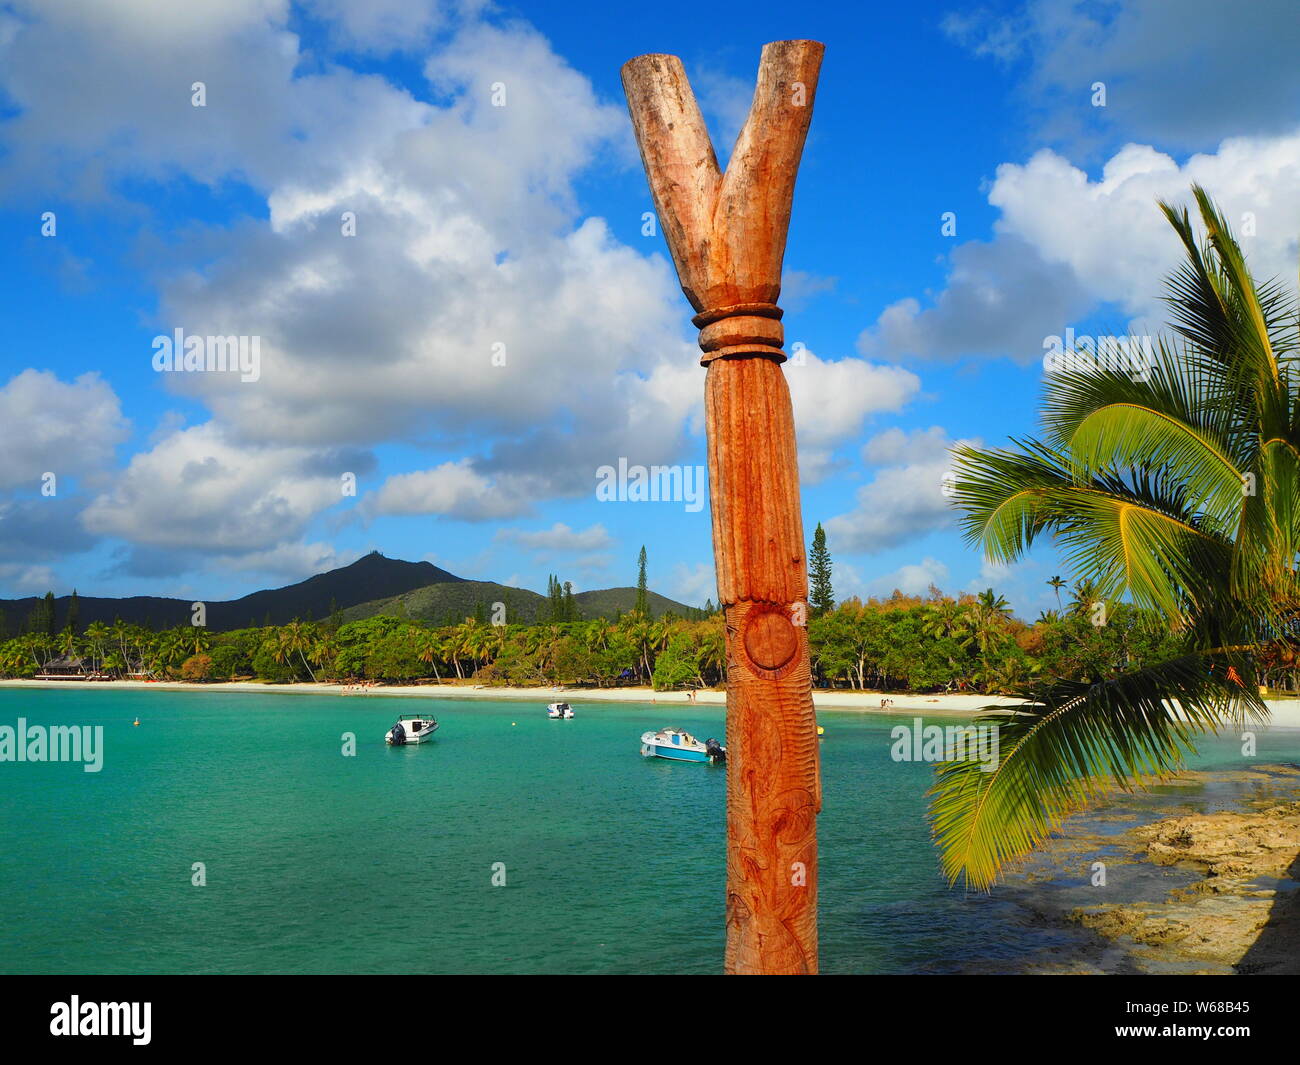 Symbols of History and Tradition on an Island in the South Seas Stock Photo